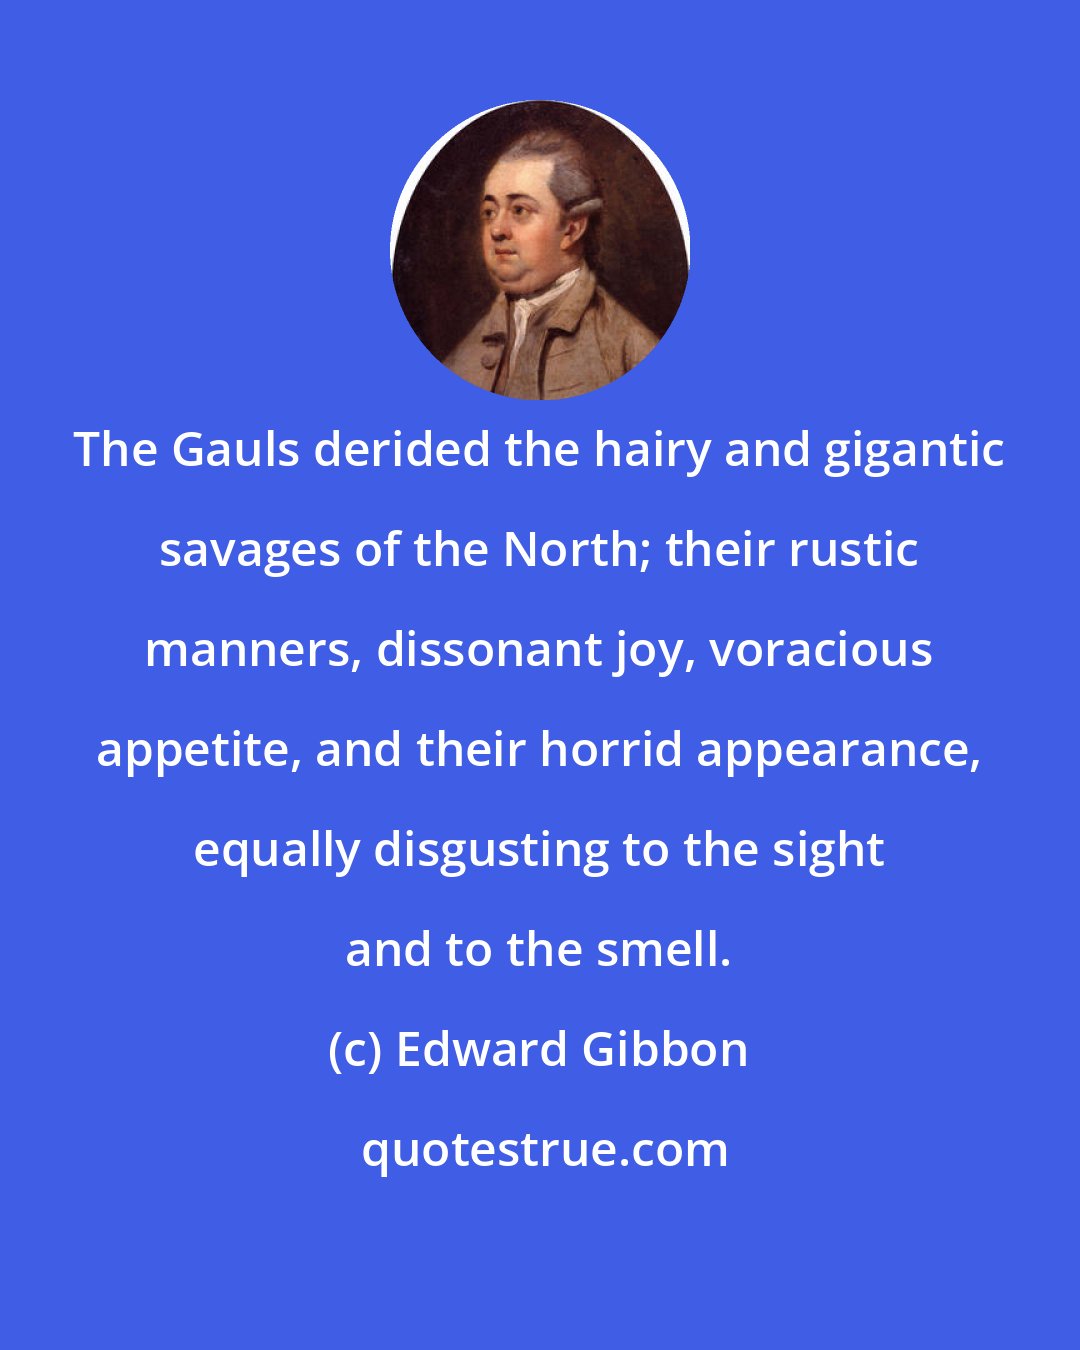 Edward Gibbon: The Gauls derided the hairy and gigantic savages of the North; their rustic manners, dissonant joy, voracious appetite, and their horrid appearance, equally disgusting to the sight and to the smell.